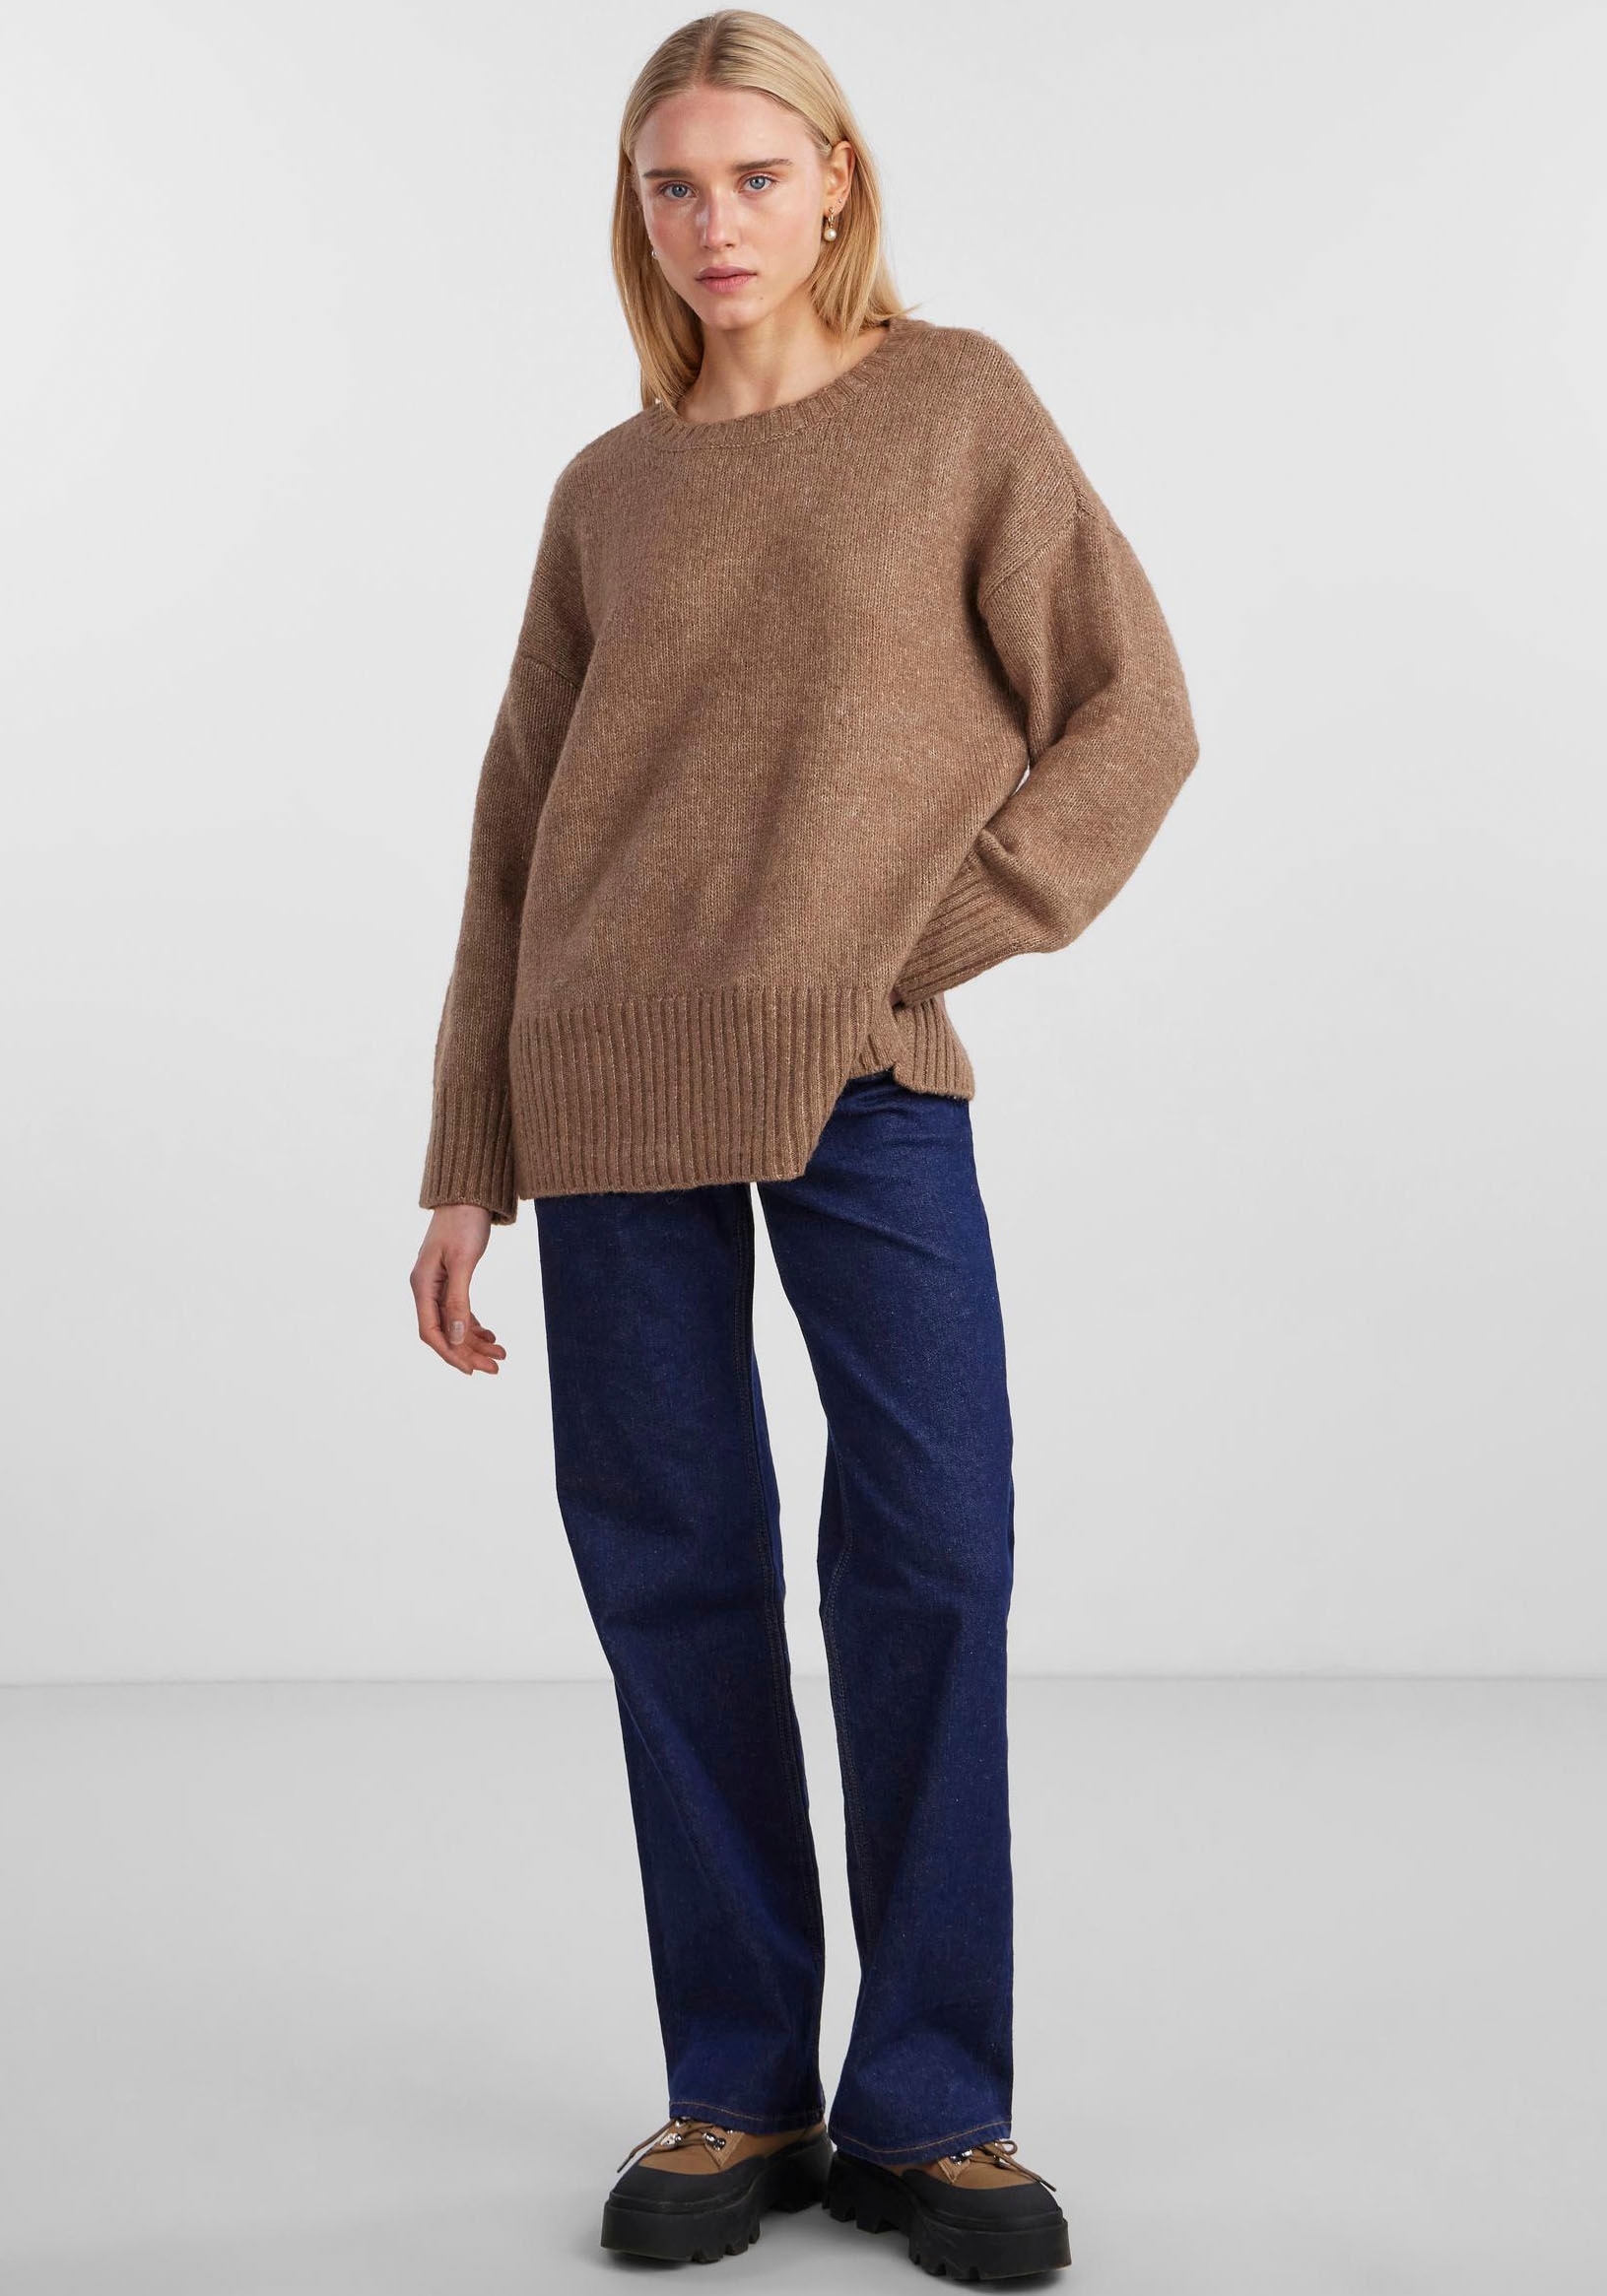 pieces Rundhalspullover »PCNANCY LS LOOSE O-NECK KNIT NOOS BC«, Oversized